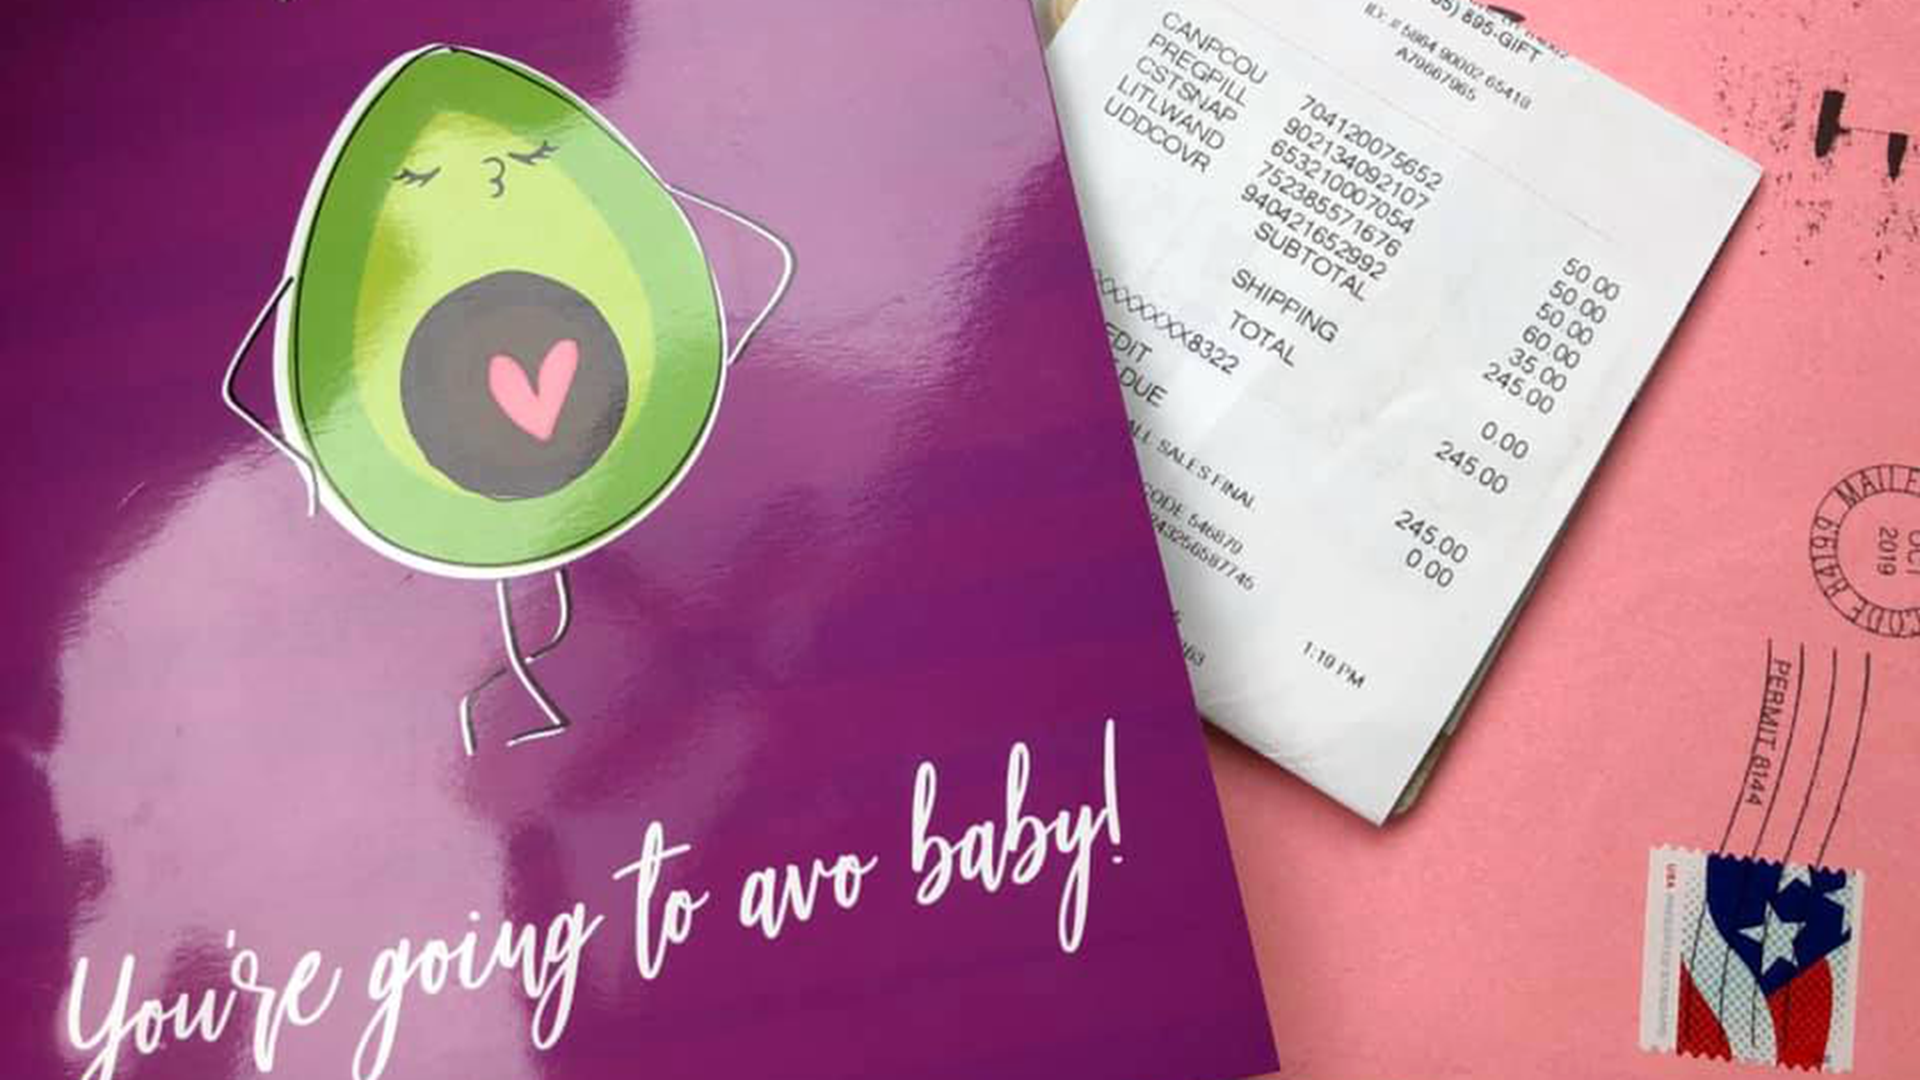 Women across the country are getting mysterious gift cards in the mail congratulating them on their pregnancy. The problem: most of them are not pregnant.